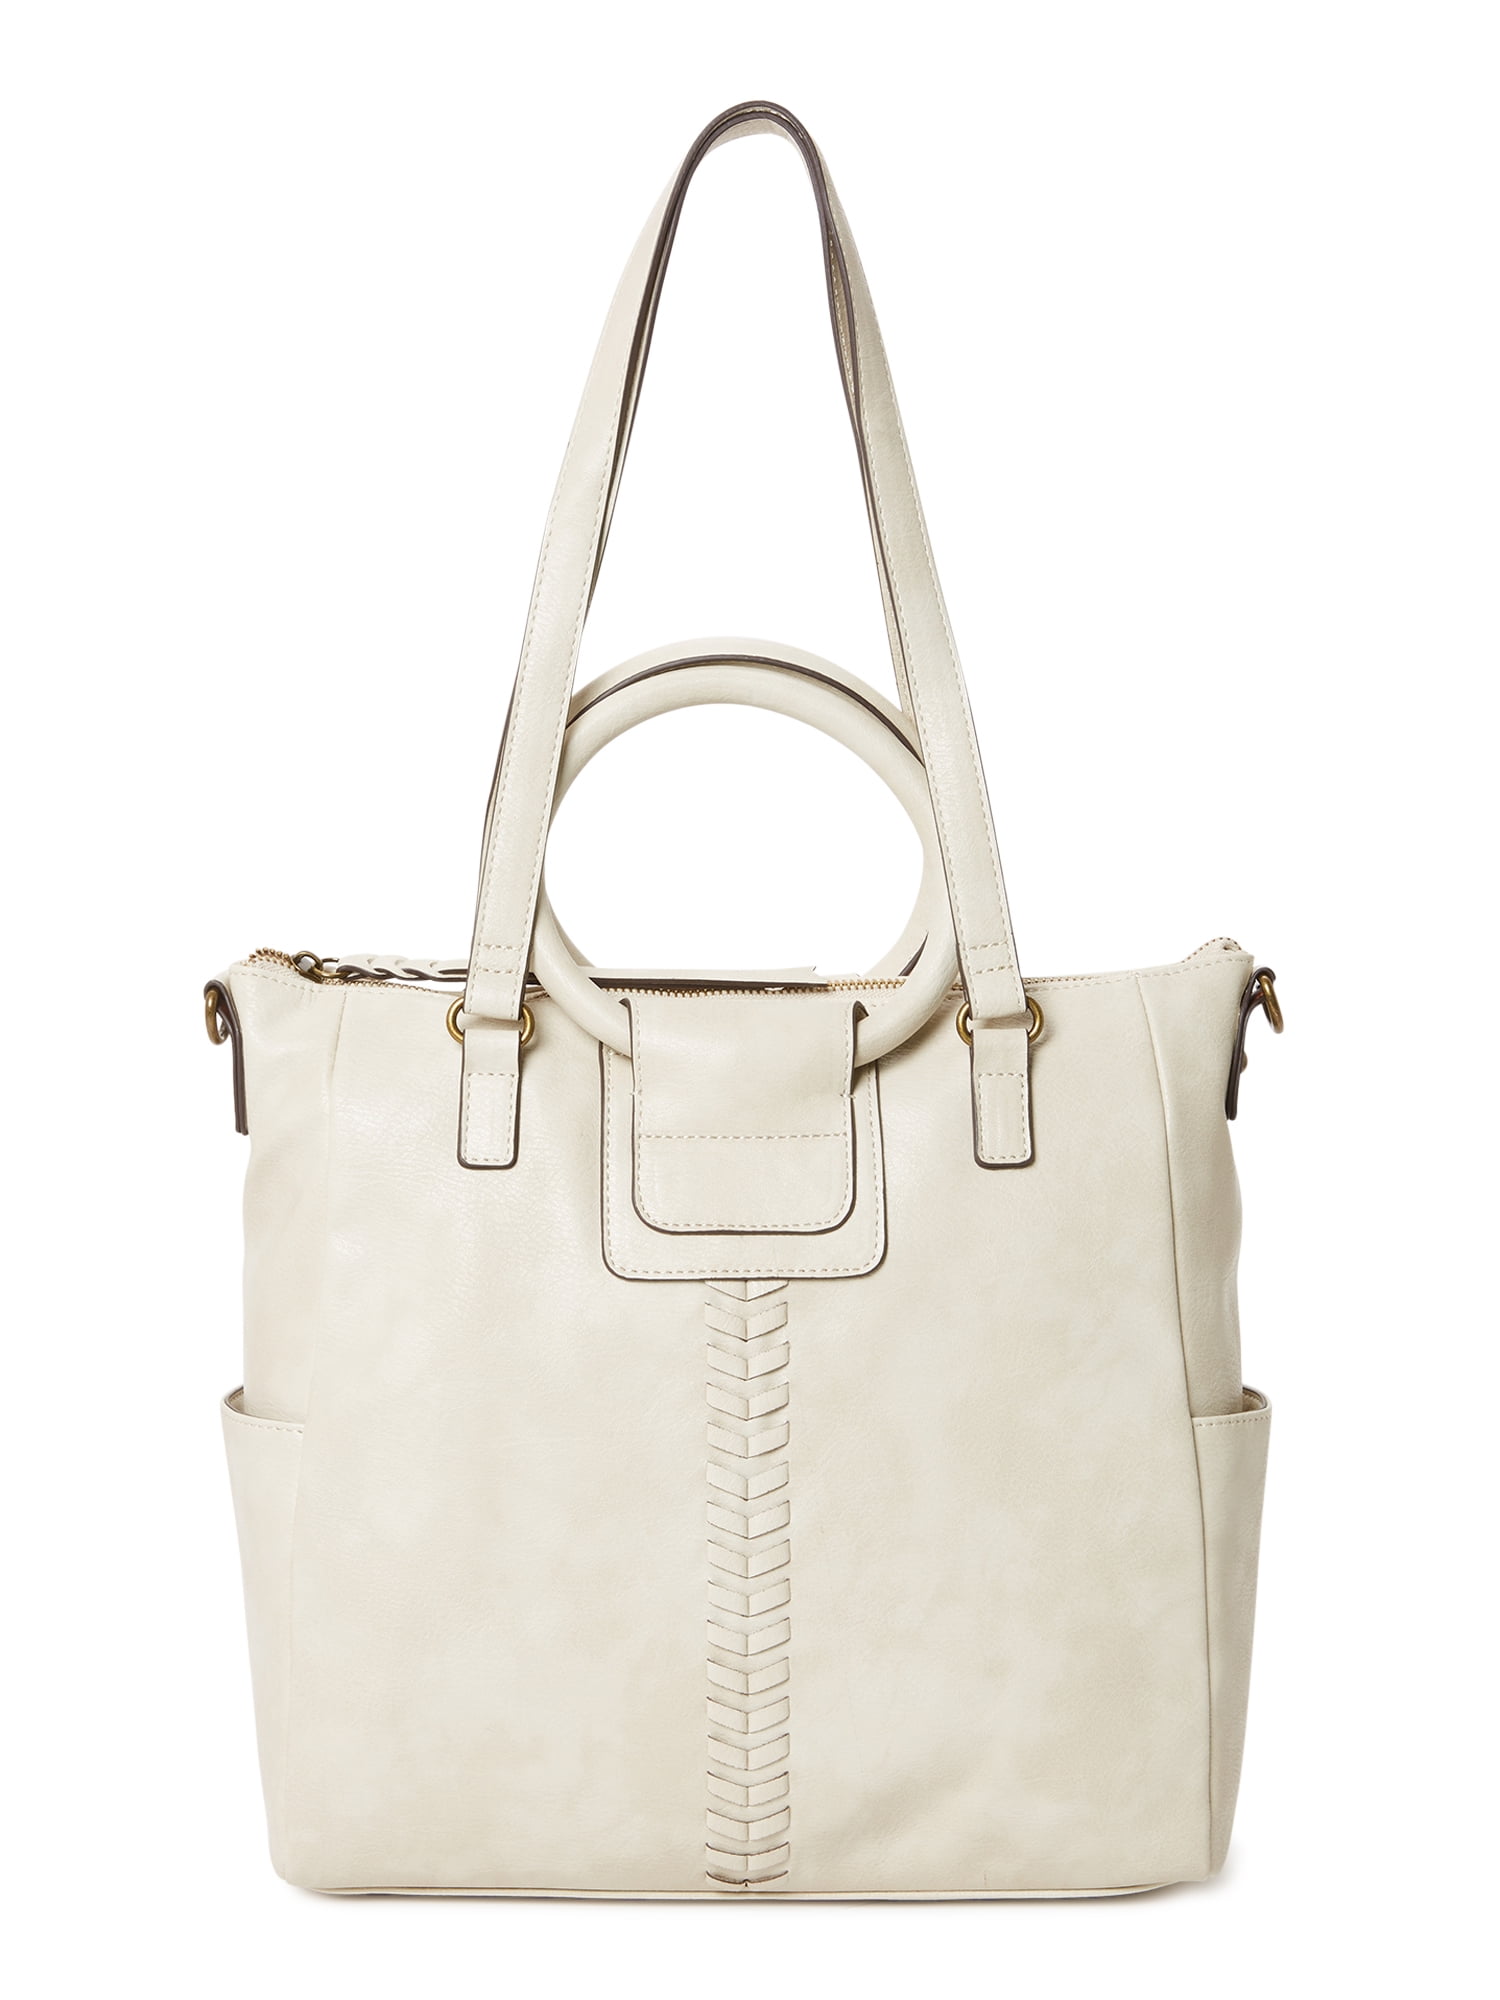 Time and Tru Women's Giselle Faux Leather Convertible Tote Handbag Beige